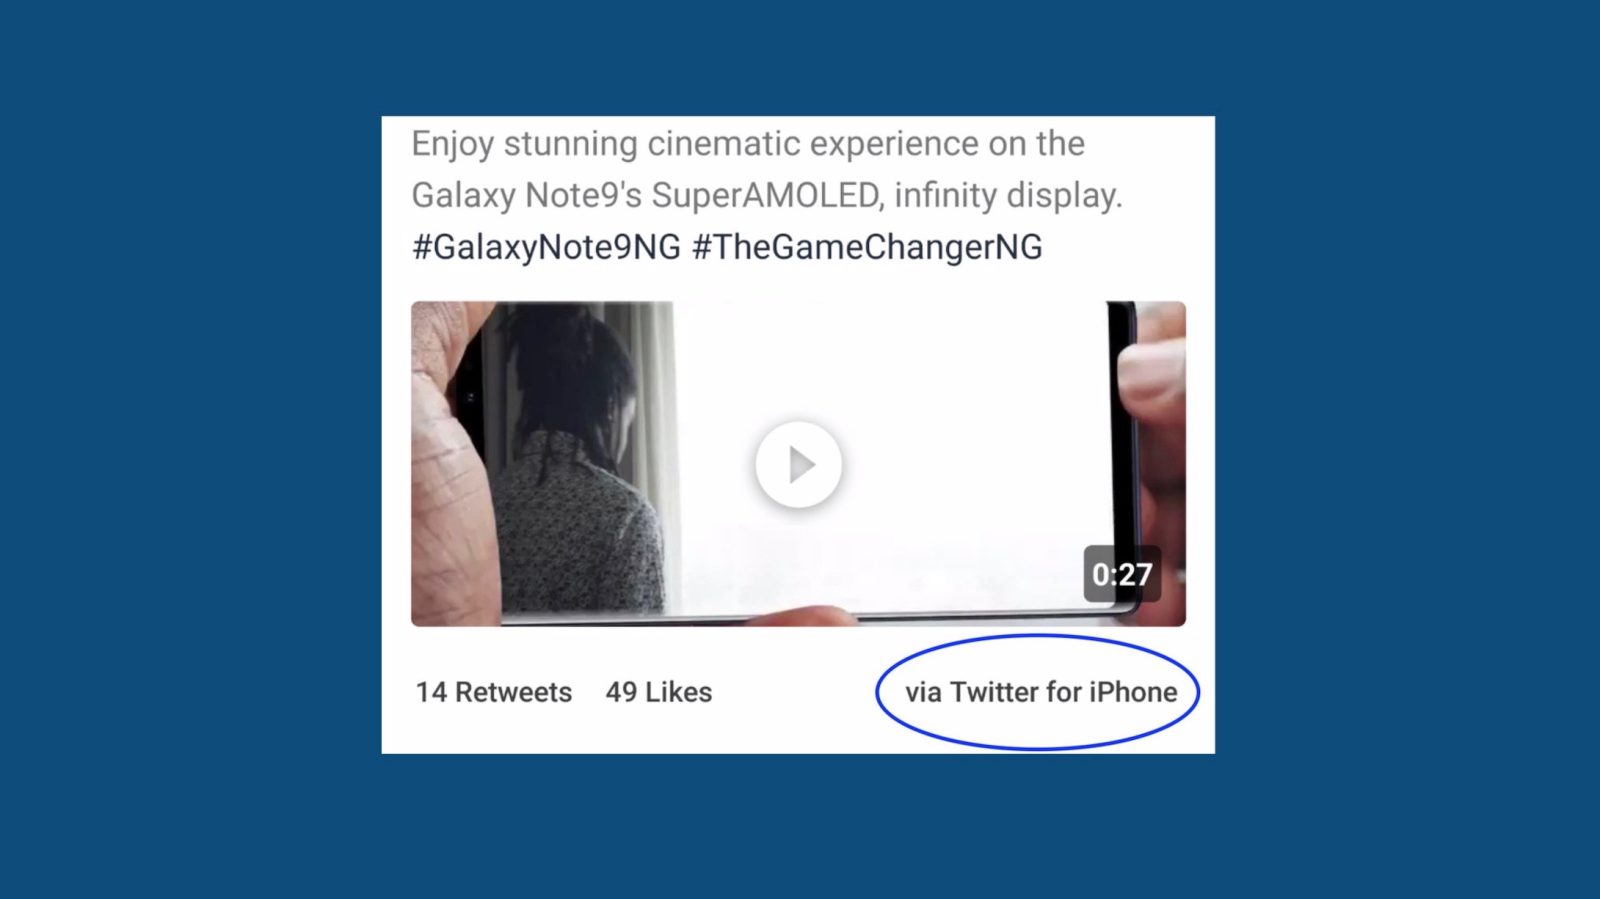 Samsung Tweets Galaxy Note 9 Promo From Twitter For Iphone